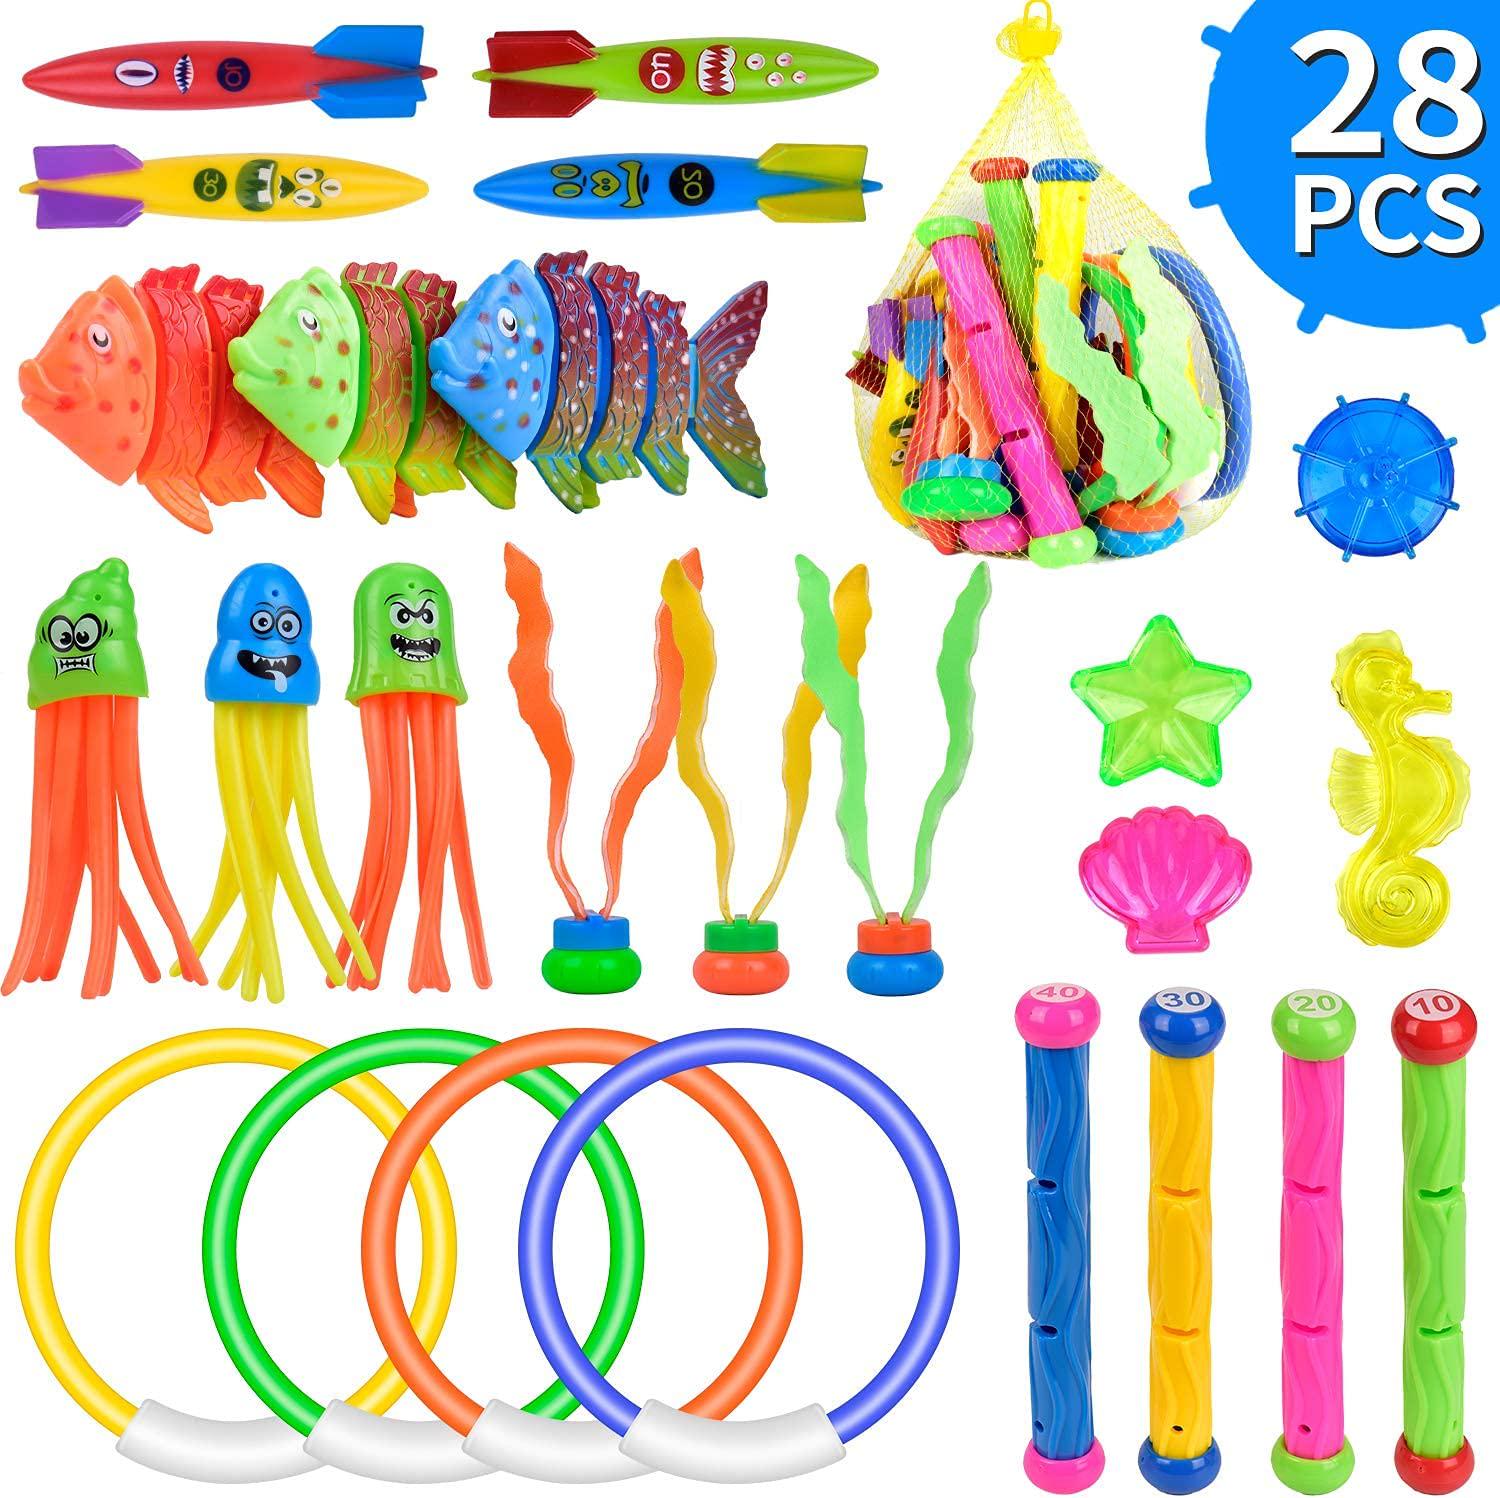 Epzia, Epzia Diving Toys, 28 Pcs Underwater Swimming Pool Toys,Pool Toys for Kids 8-12,Toddler Pool Toys,Water Game for Kids Ages 3+